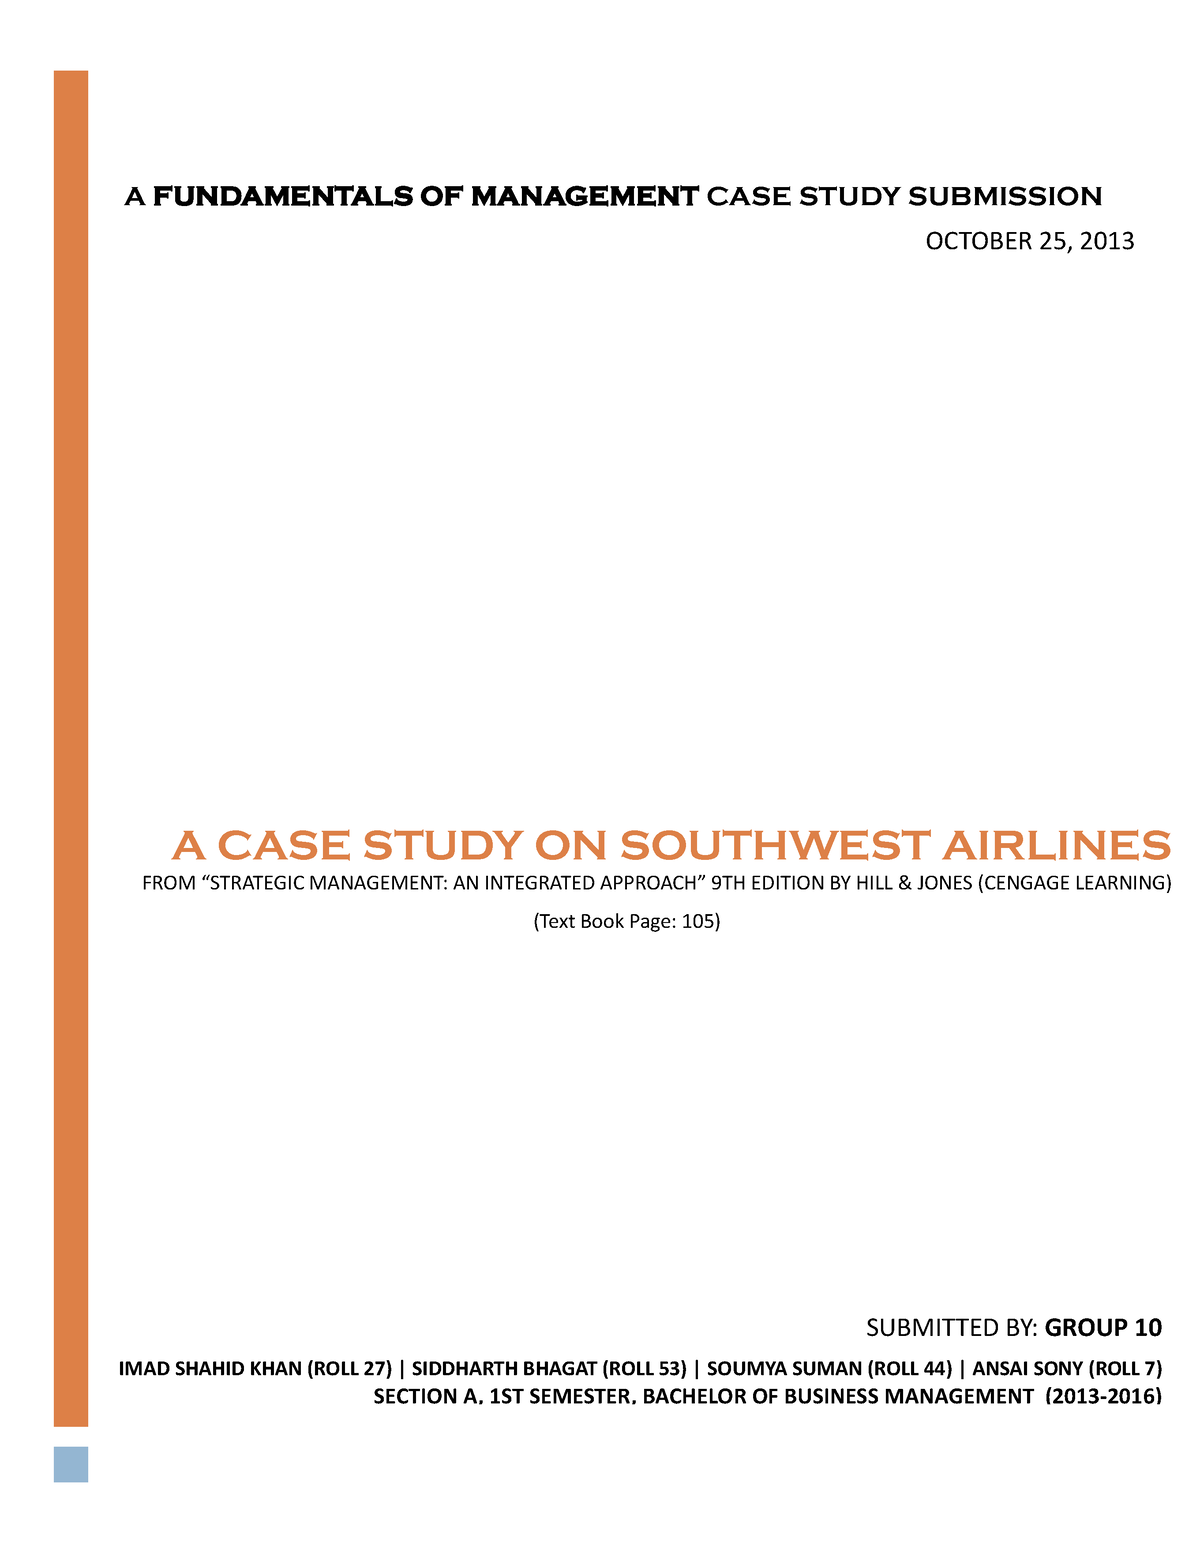 southwest airlines case study hrm